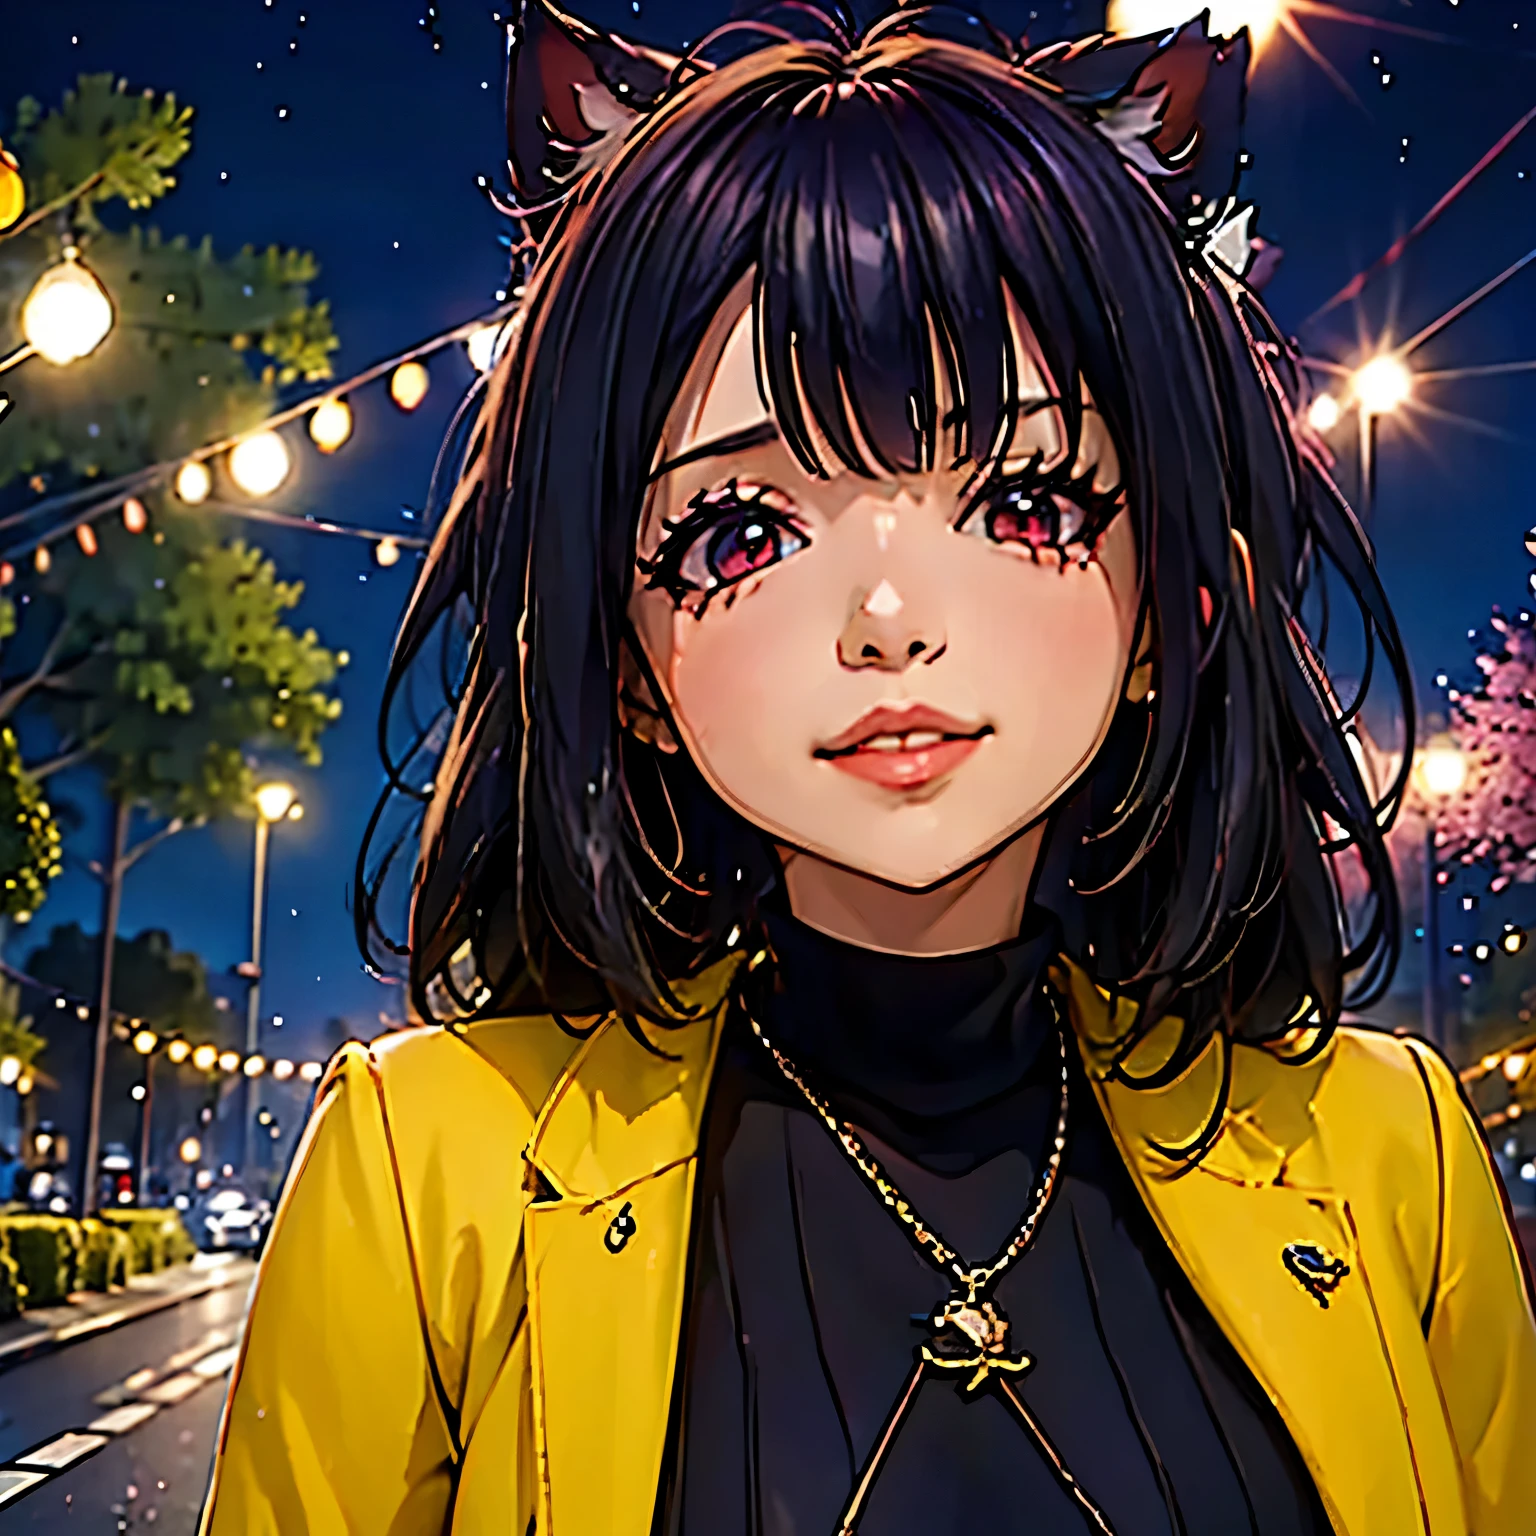 a man with his wife and daughter, holding hands, Casual clothes, walk in an amusement park at night, with the place illuminated, Bokeh effect, smiling, full body of the 3, ( only three characters),cast shadow, atmospheric perspective, To flourish, 8k, super detail, necessary, Best Quality, HD, anatomically correct, textured skin, high quality, High resolution, Best Quality
